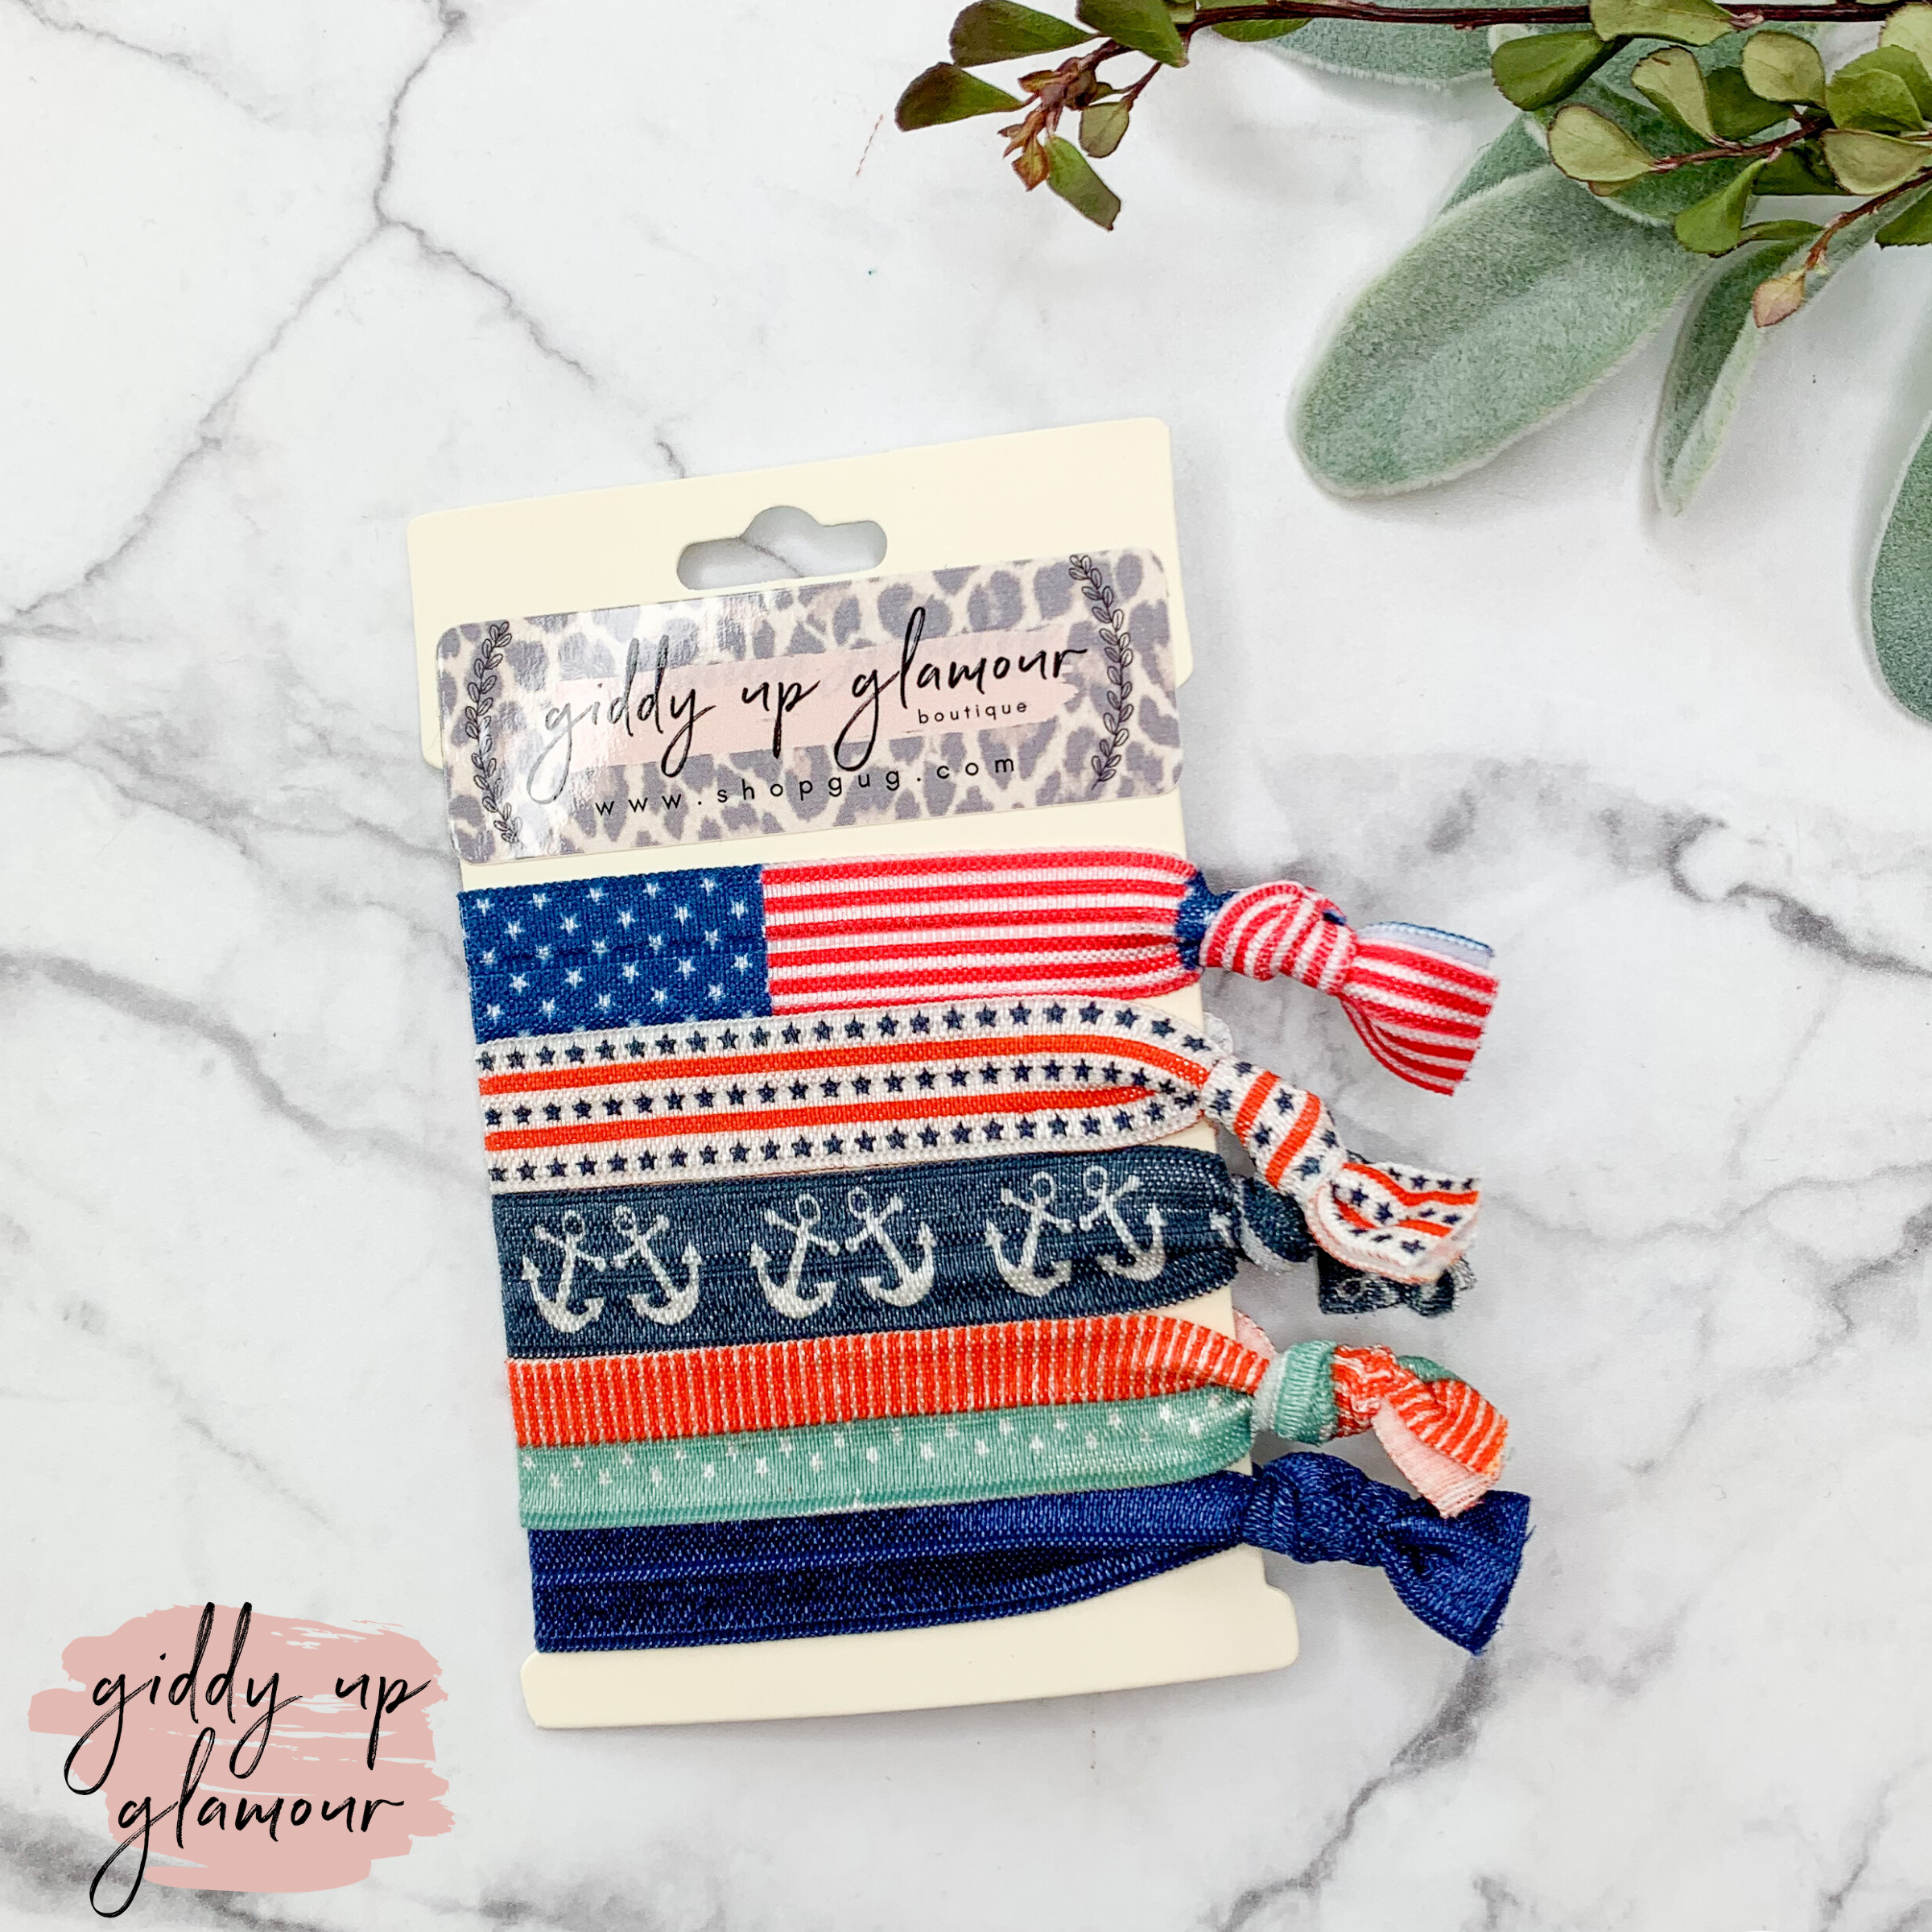 Buy 3 for $10 | Set of 5 | Soft Hair Ties in Red, White, and Blue Patriotic Prints - Giddy Up Glamour Boutique